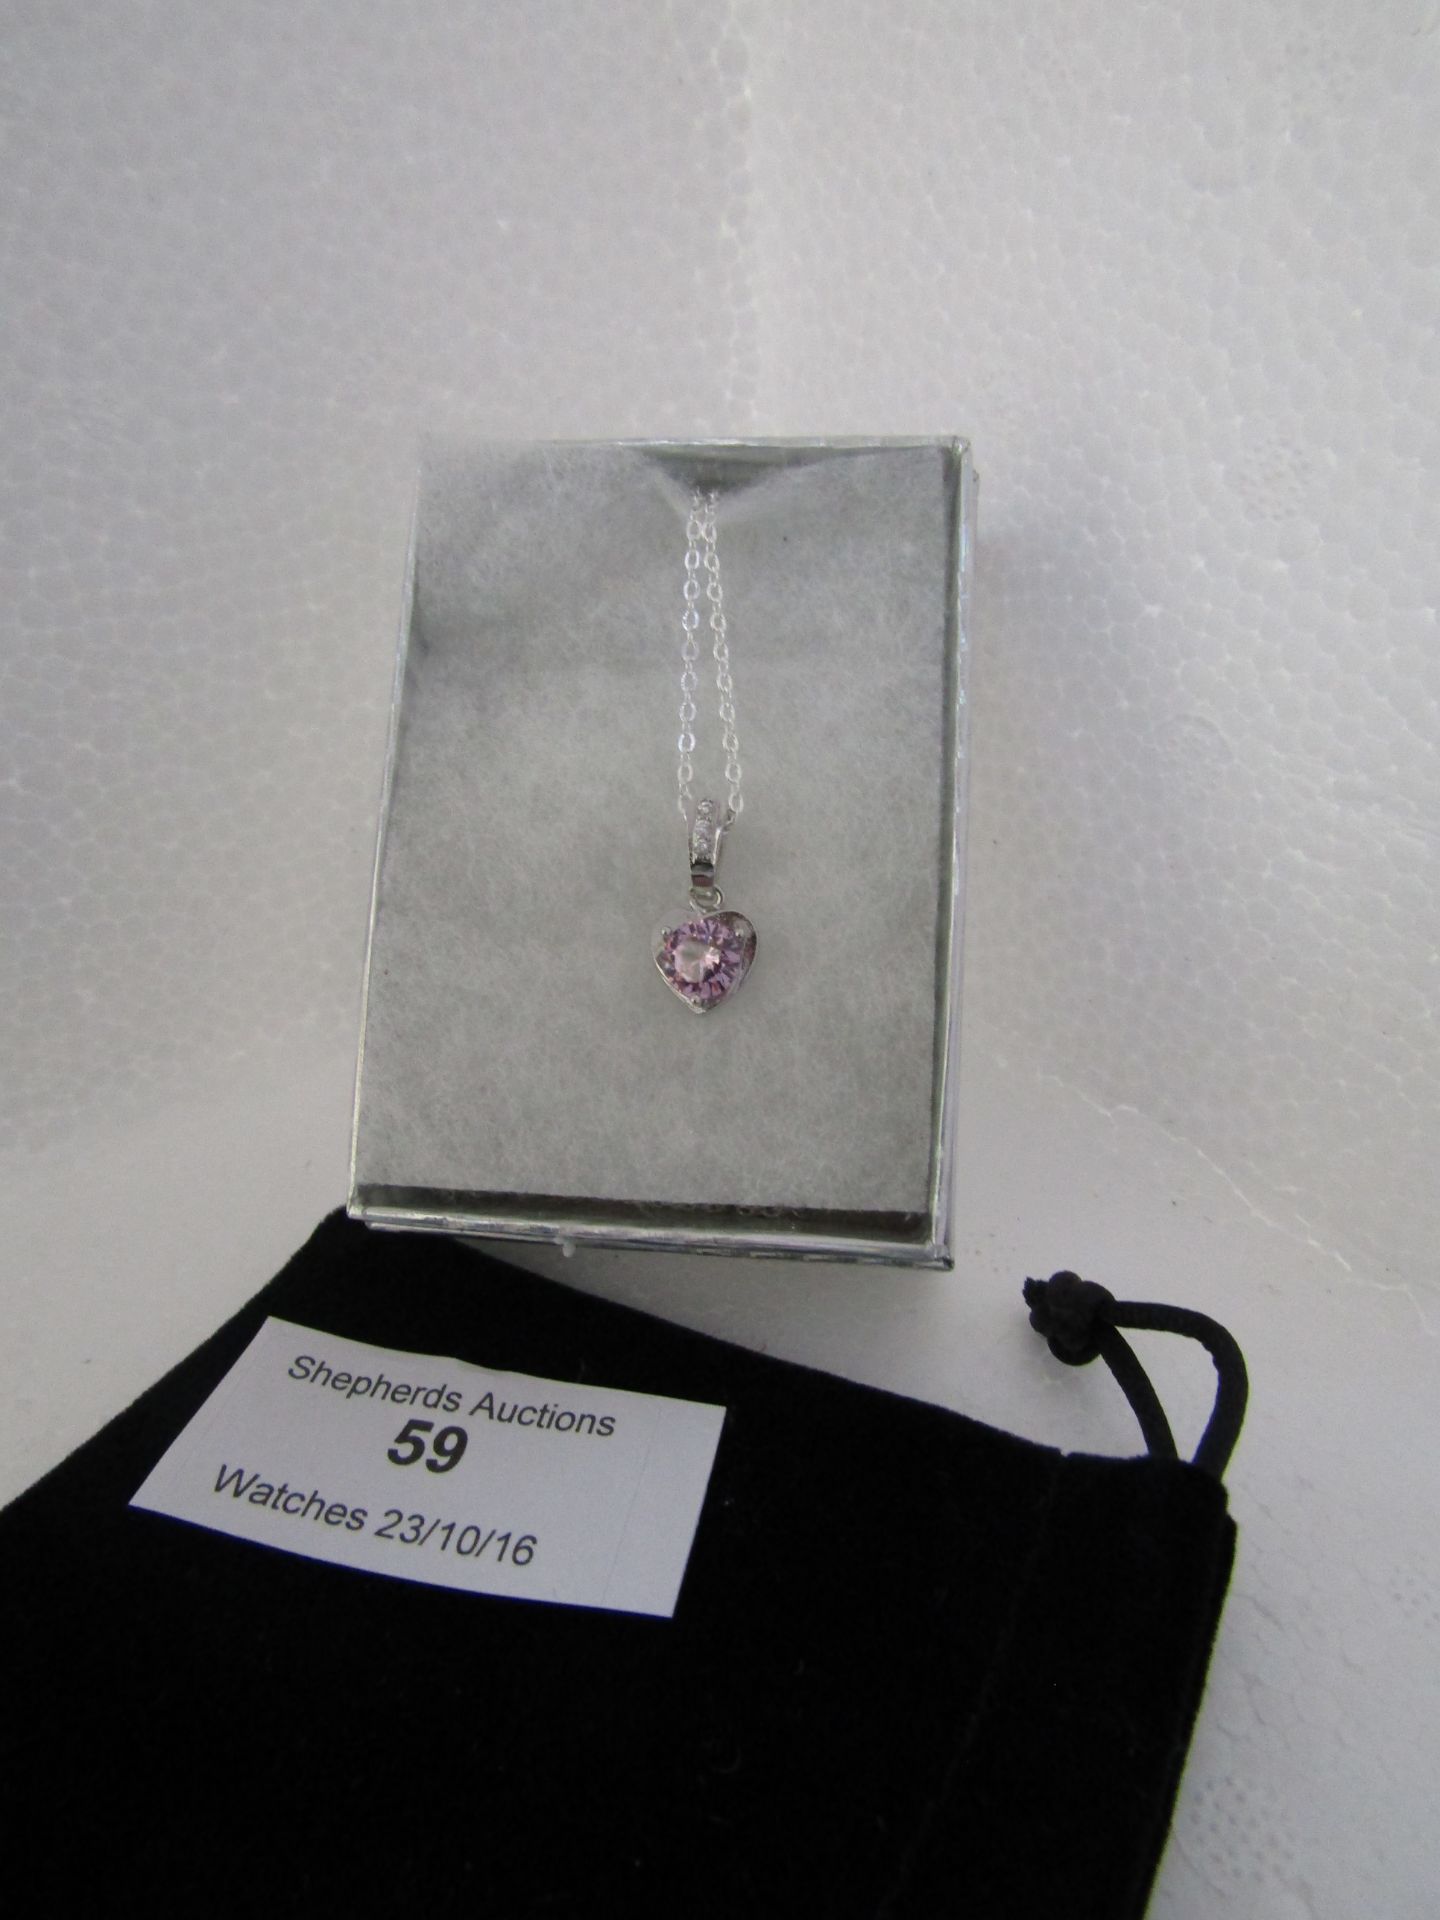 Necklace with Large Swarovski element stone, New in a Presentation box